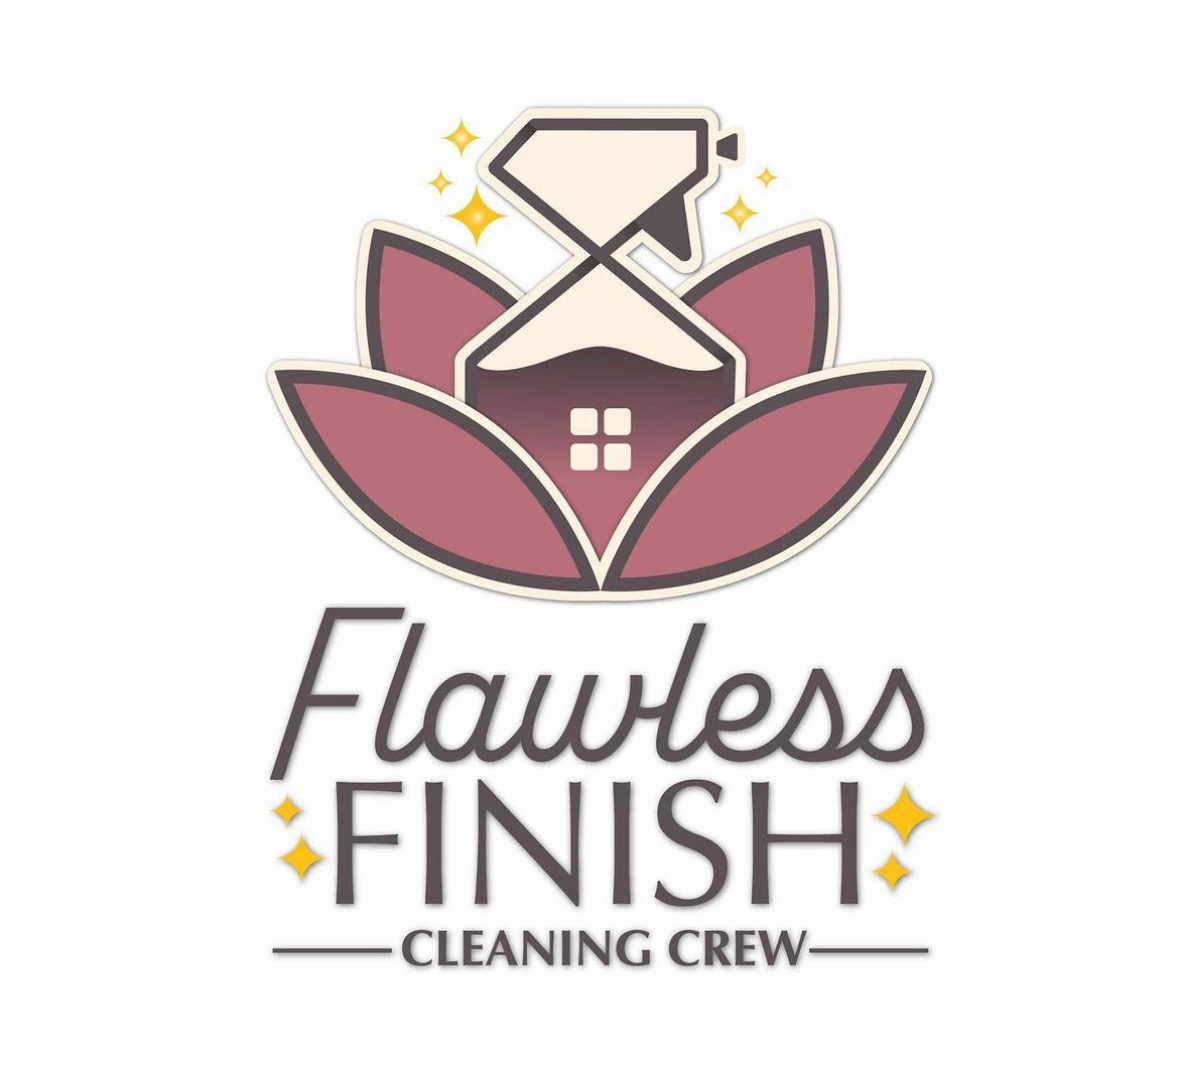 Flawless Finish Domestic Cleaning